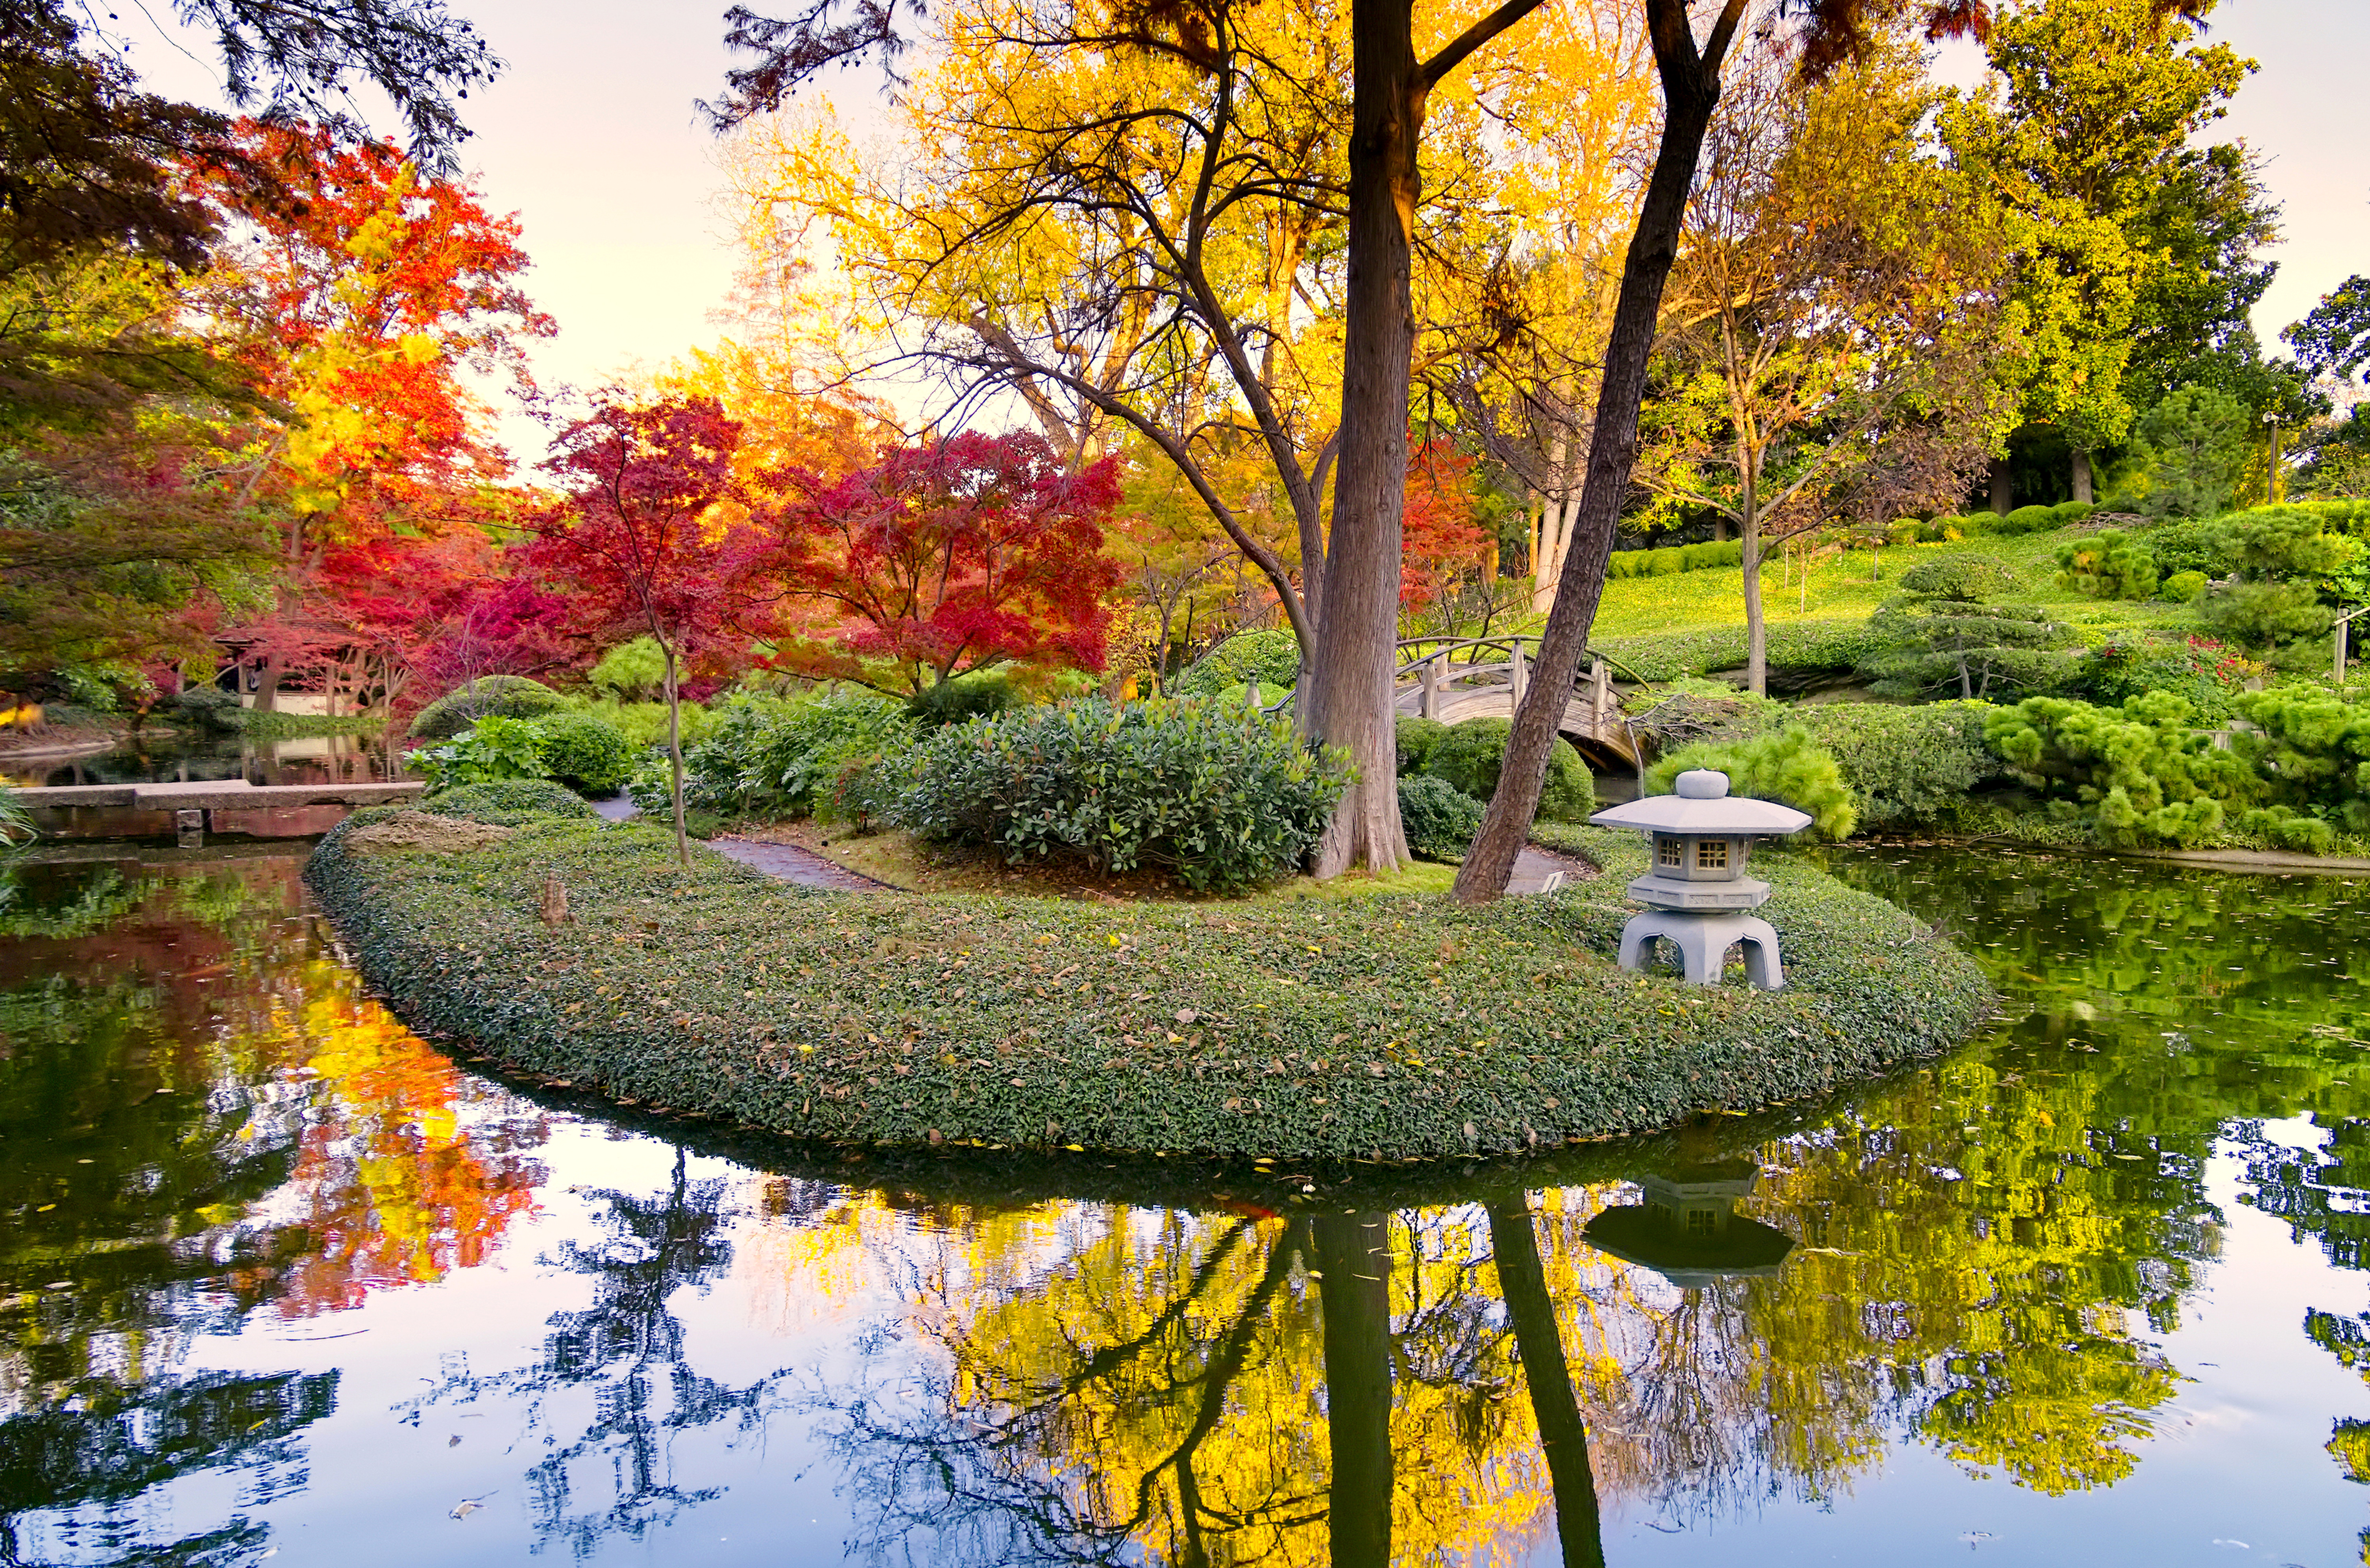 HD Windows Images fall, photography, tree, pond